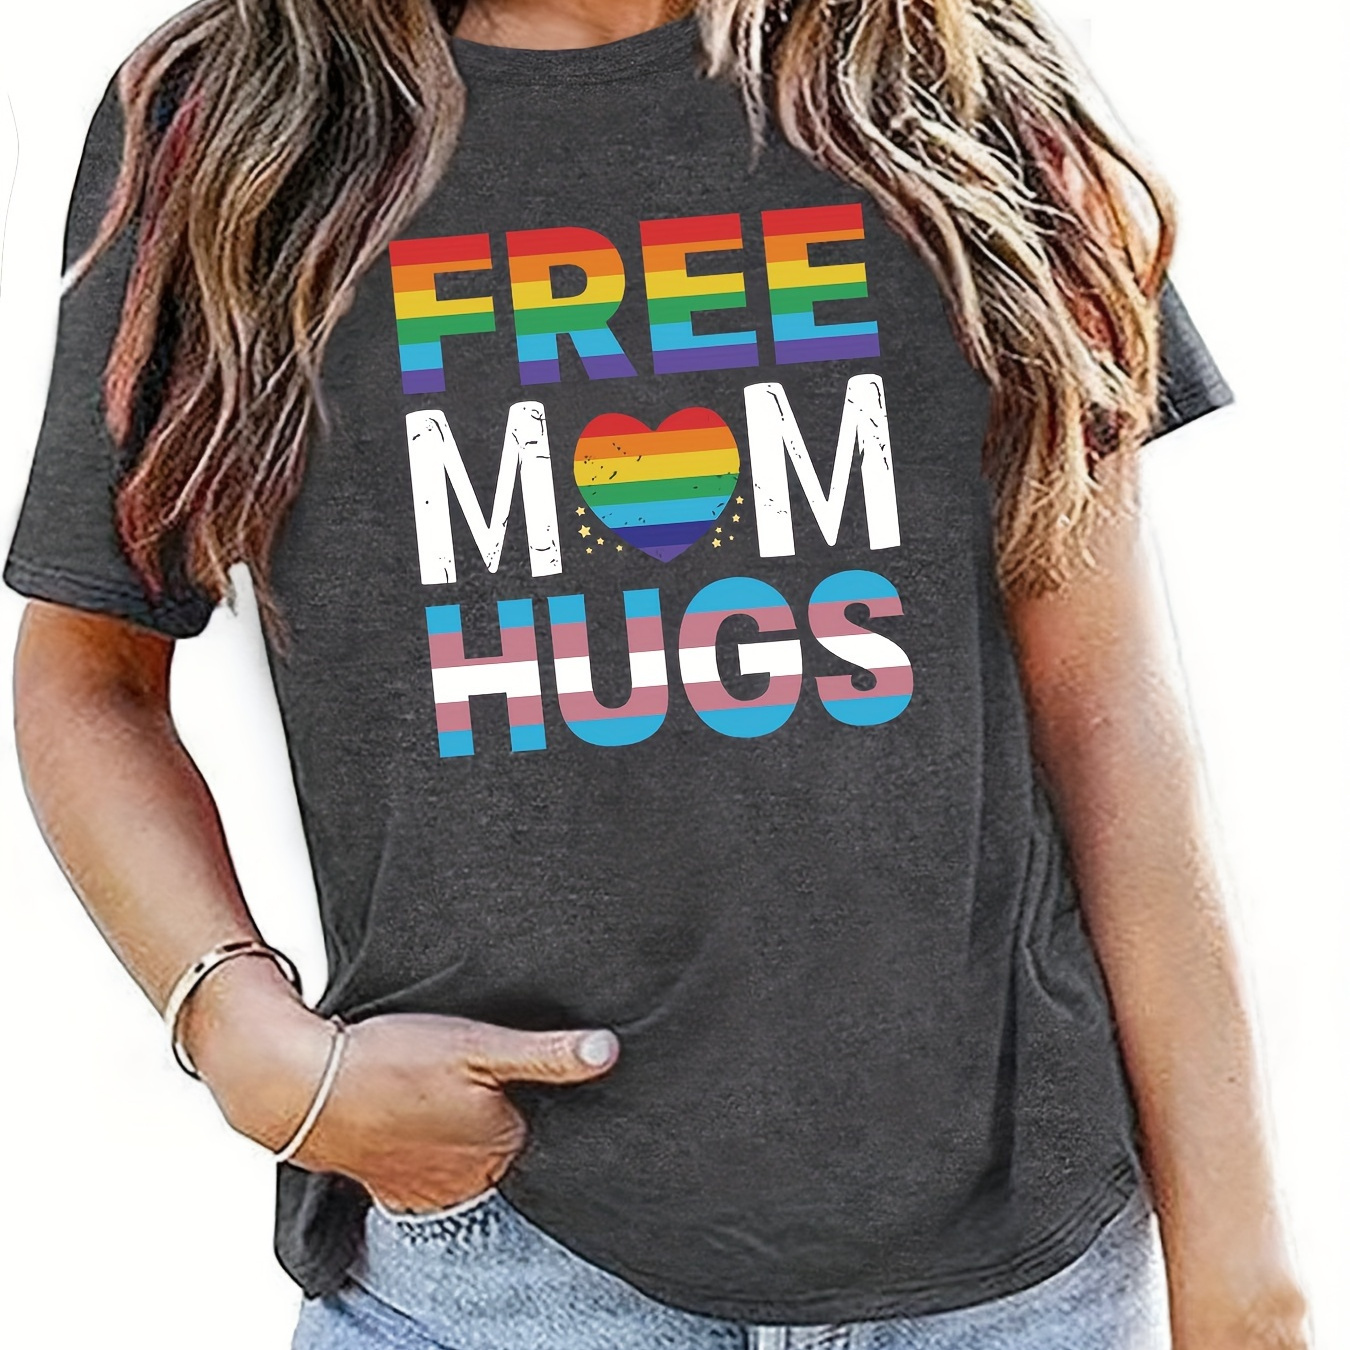 

Rainbow Free Hugs Print Crew Neck T-shirt, Short Sleeve Casual Top For Summer & Spring, Women's Clothing